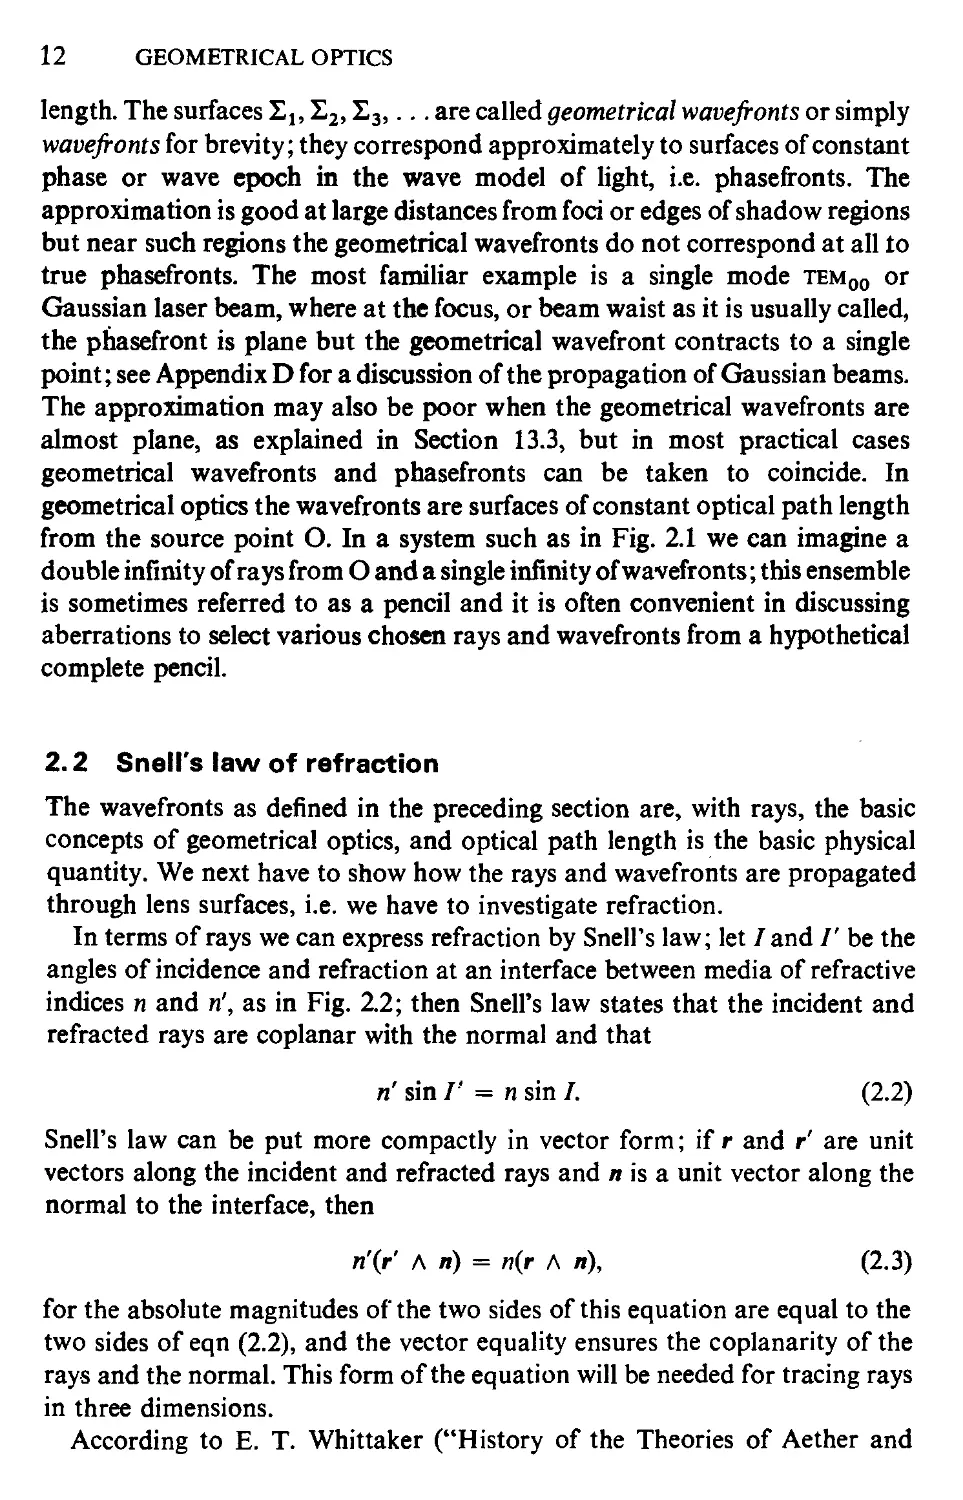 2.2 Snell's law of refraction